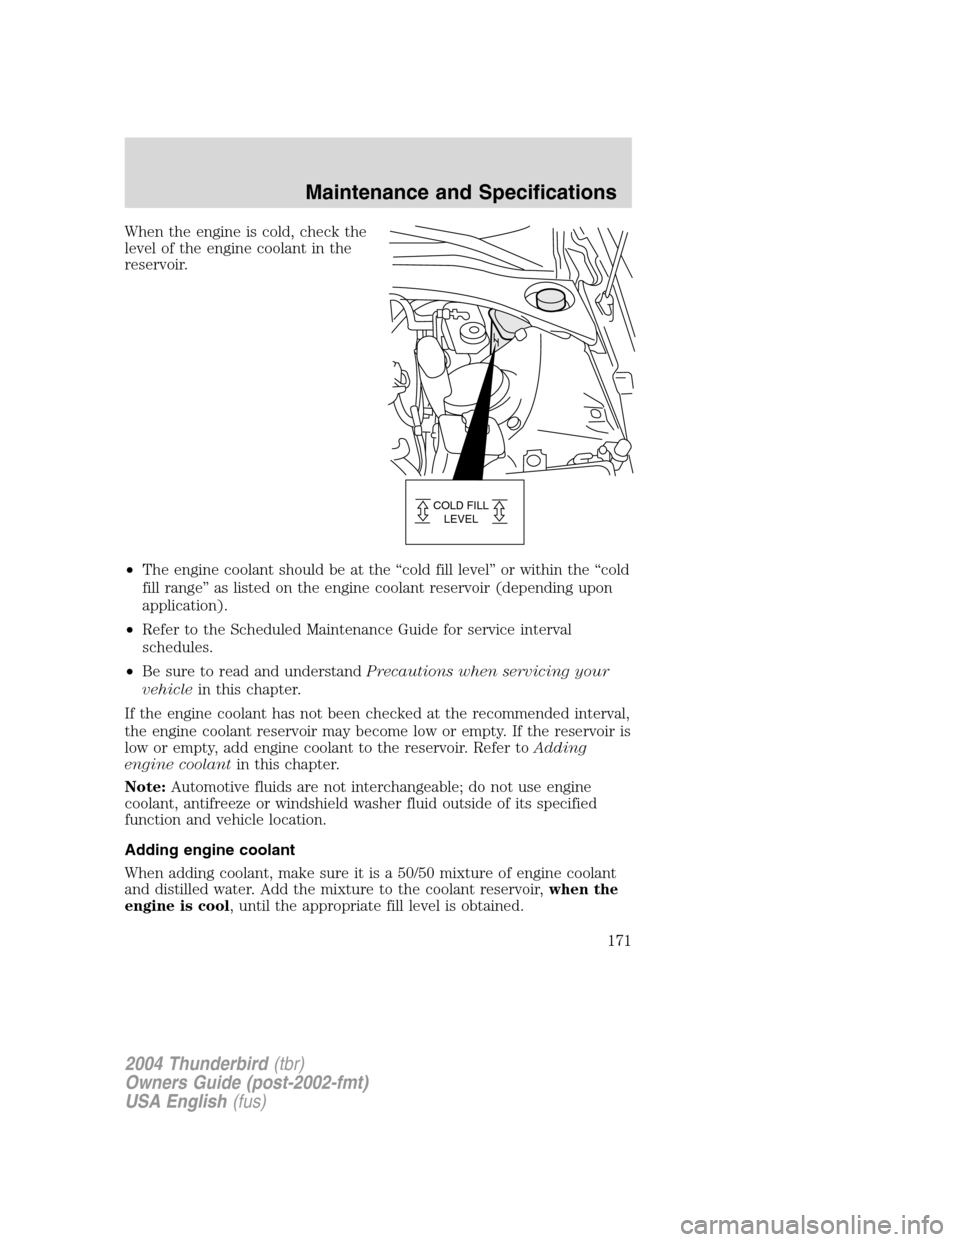 FORD THUNDERBIRD 2004 11.G Owners Manual When the engine is cold, check the
level of the engine coolant in the
reservoir.
•The engine coolant should be at the “cold fill level ”or within the “cold
fill range ”as listed on the engin